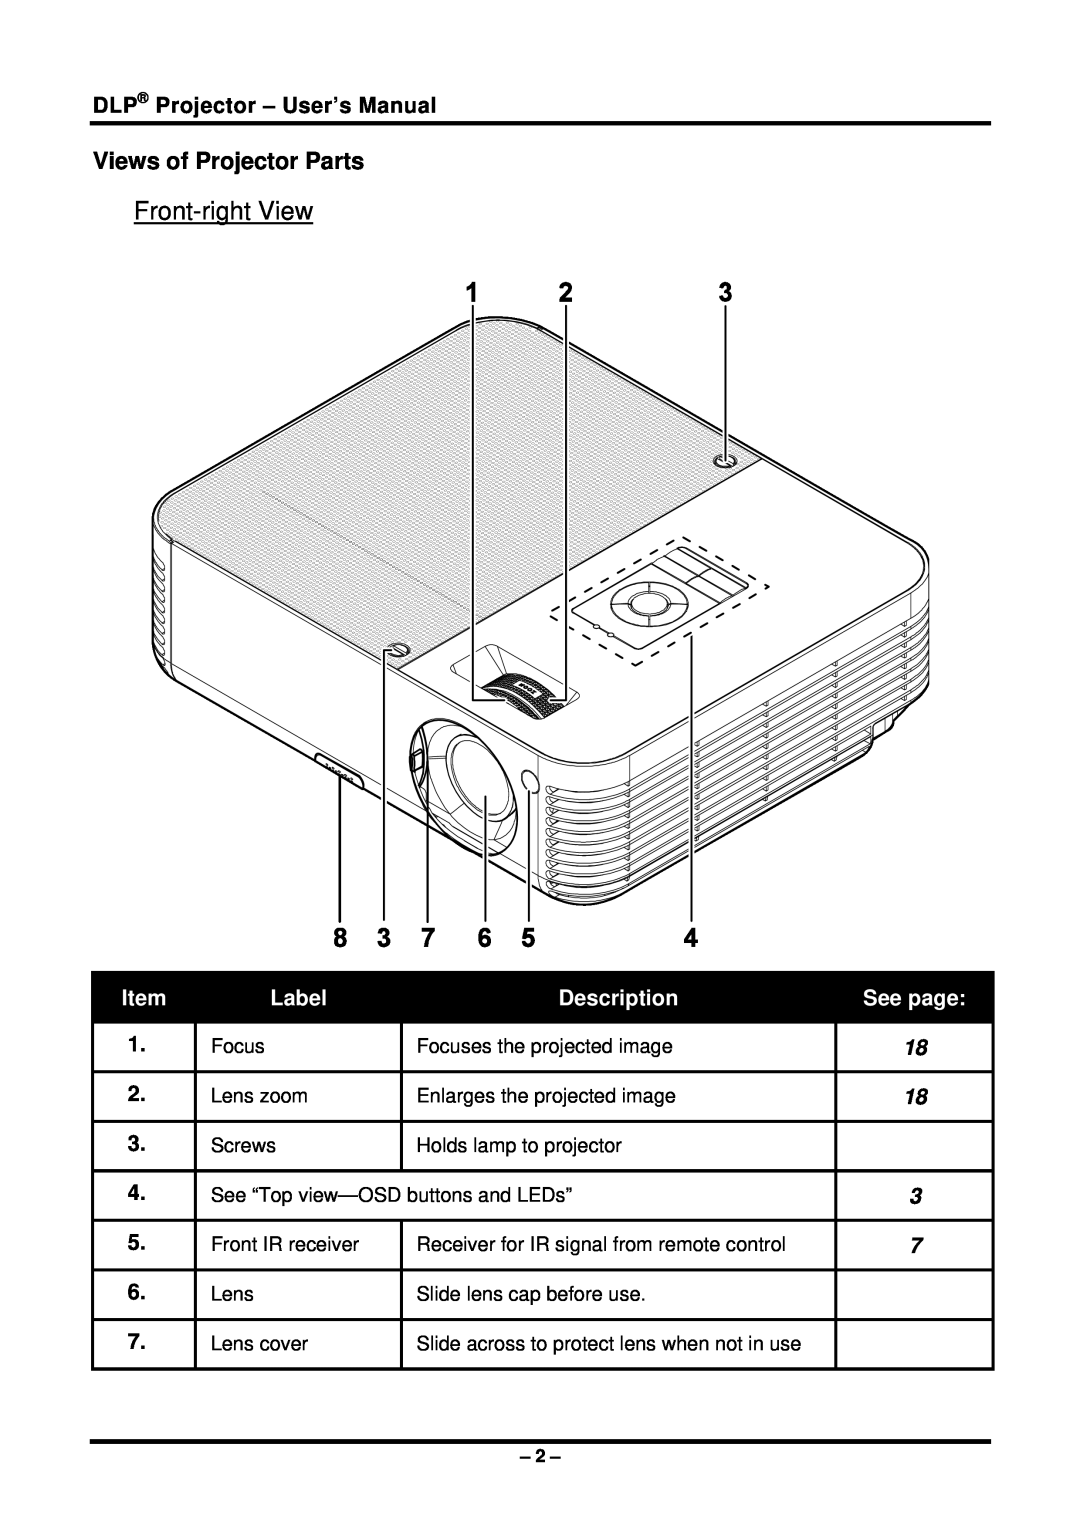 Planar PR5022 Front-right View, Views of Projector Parts, Label, Description, See page, DLP Projector - User’s Manual 